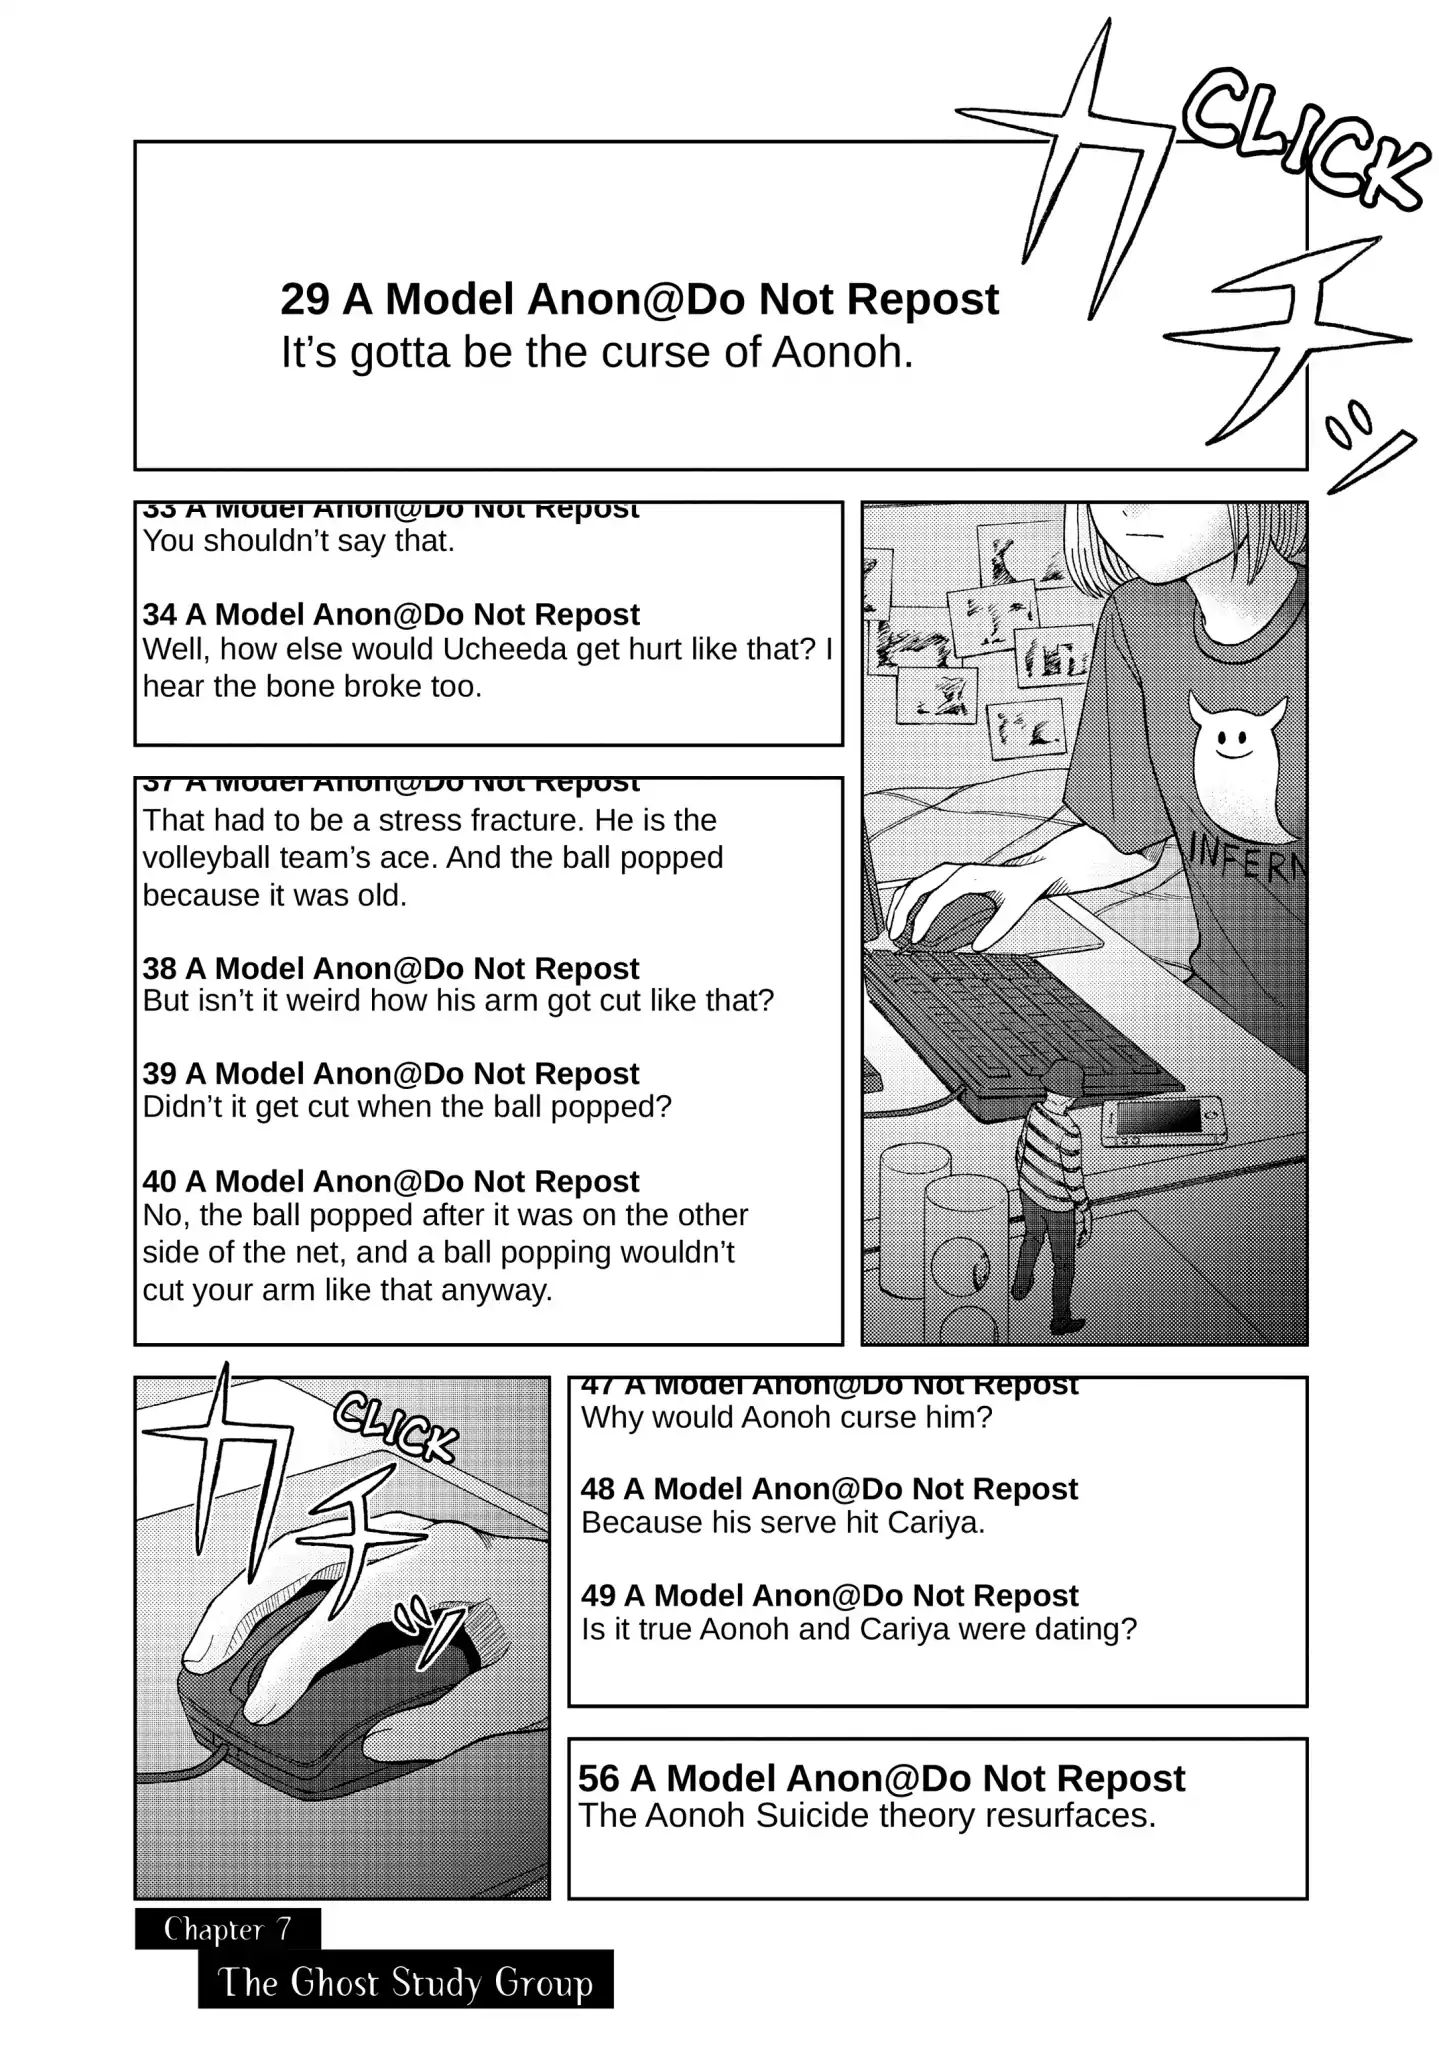 I Want To Hold Aono-Kun So Badly I Could Die - Page 1